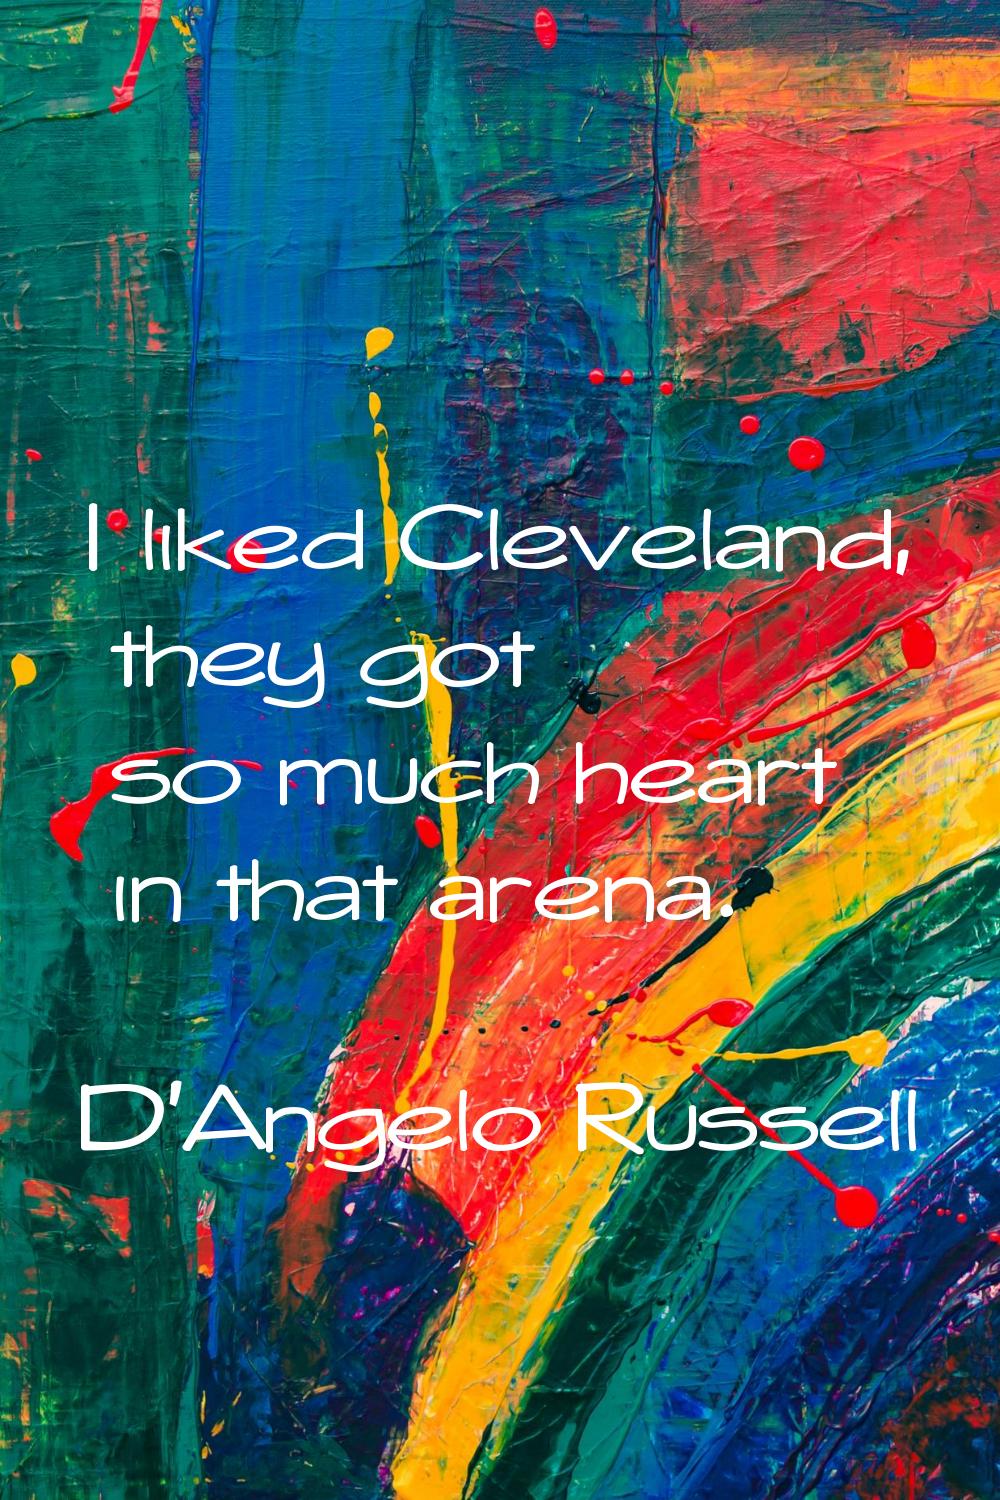 I liked Cleveland, they got so much heart in that arena.